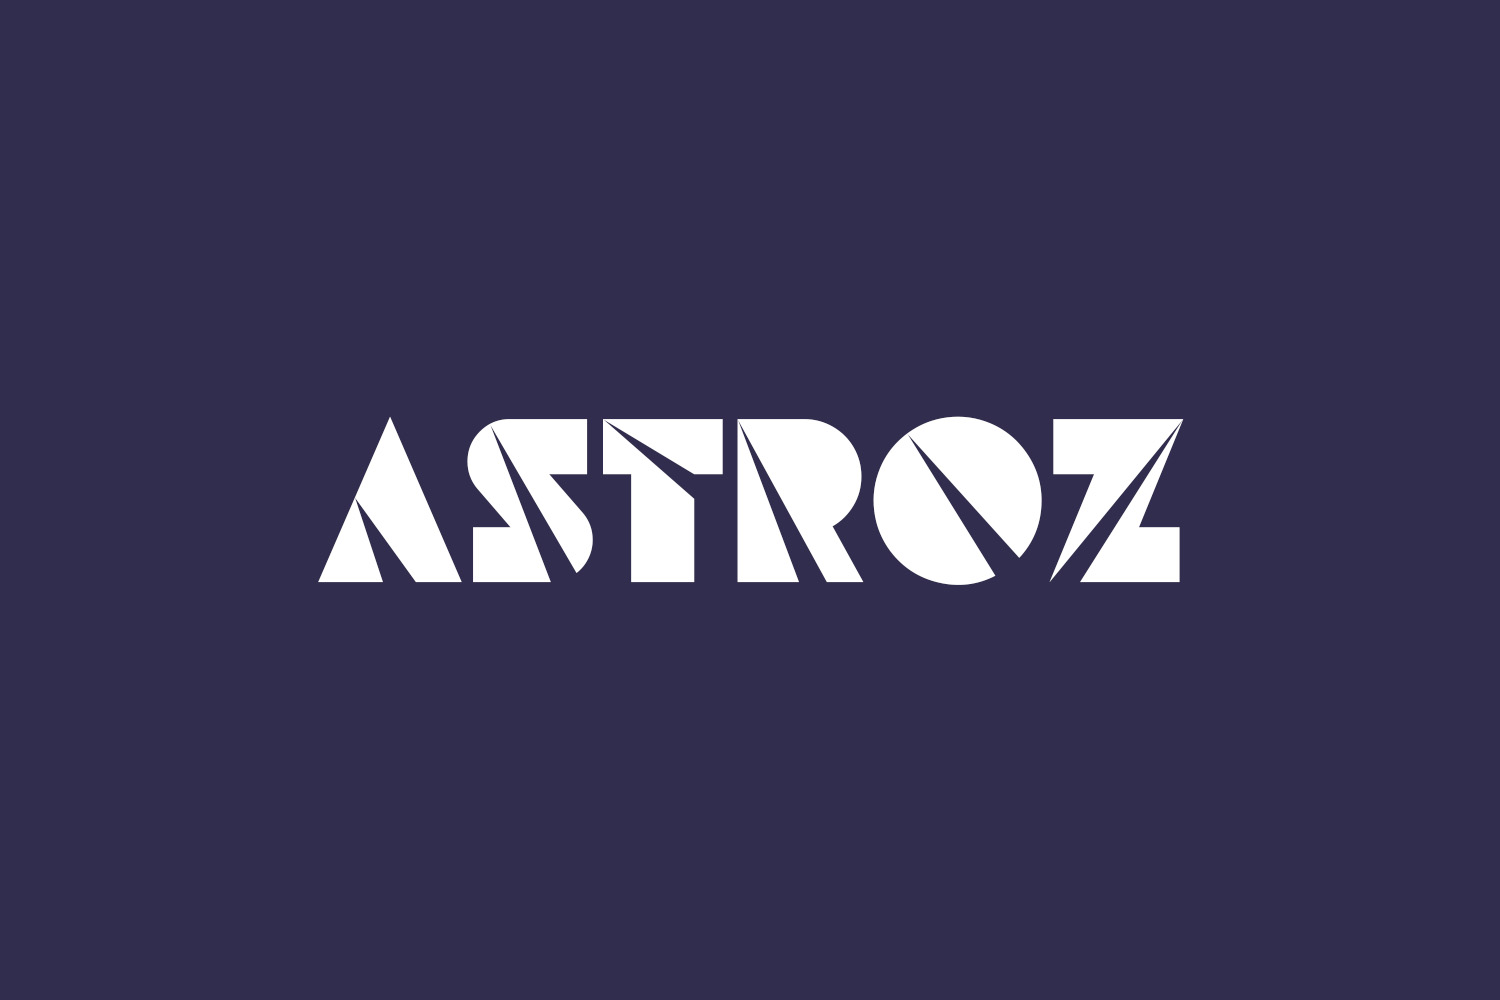 Astroz Free Font